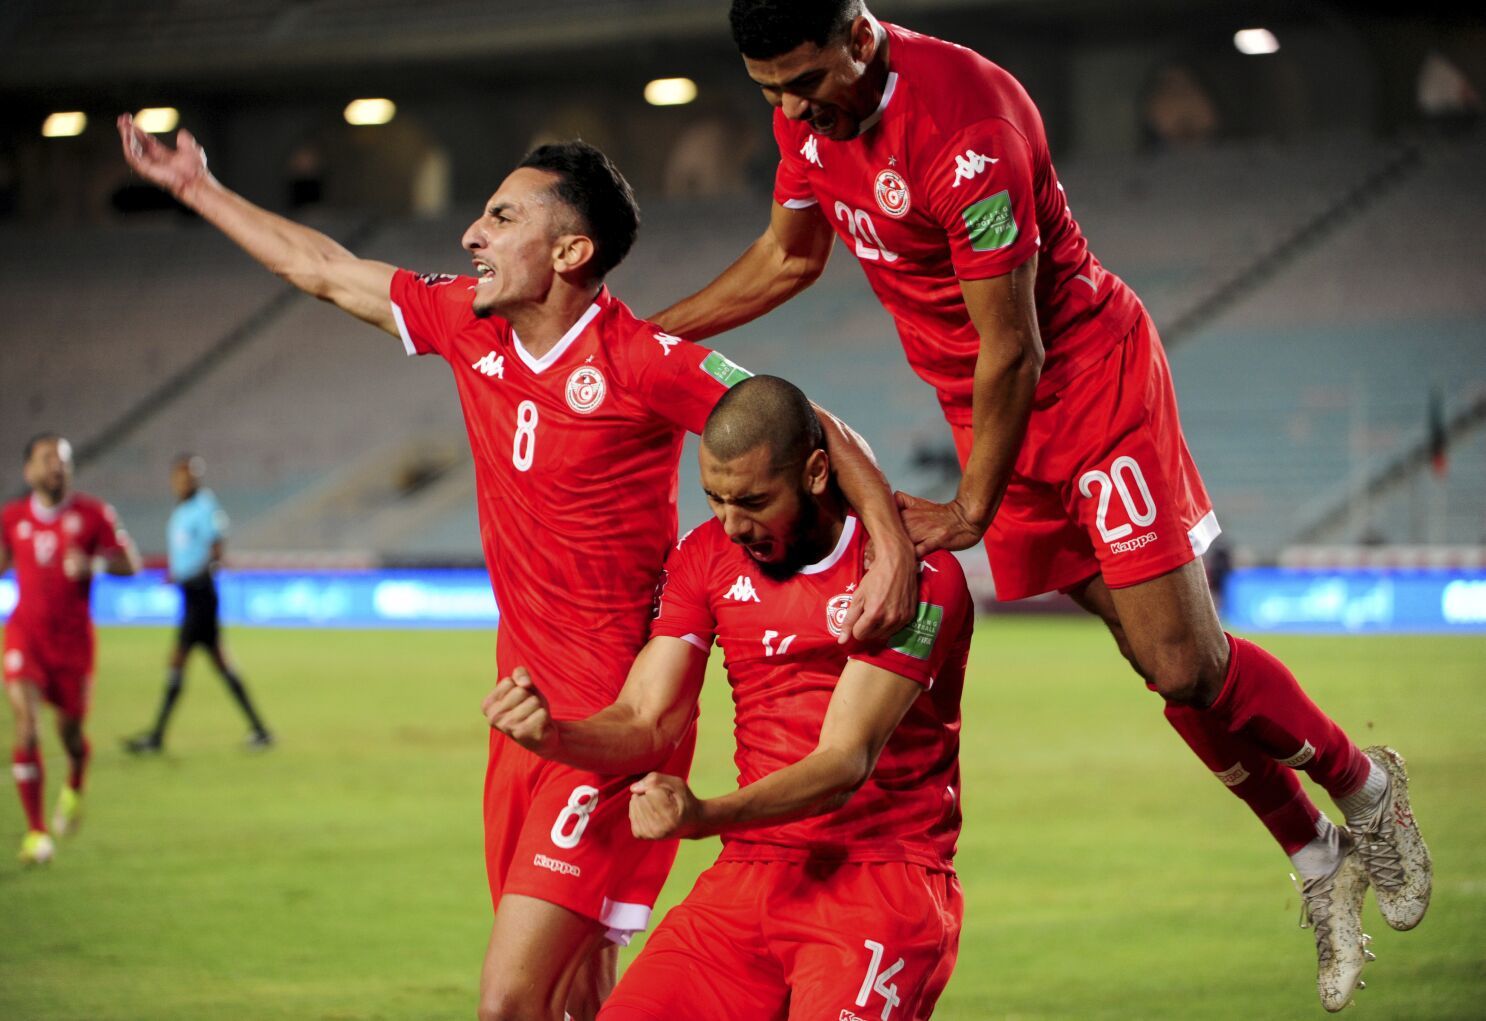 Denmark vs Tunisia: Prediction, Odds, Betting Tips, and How to Watch | 22/11/2022